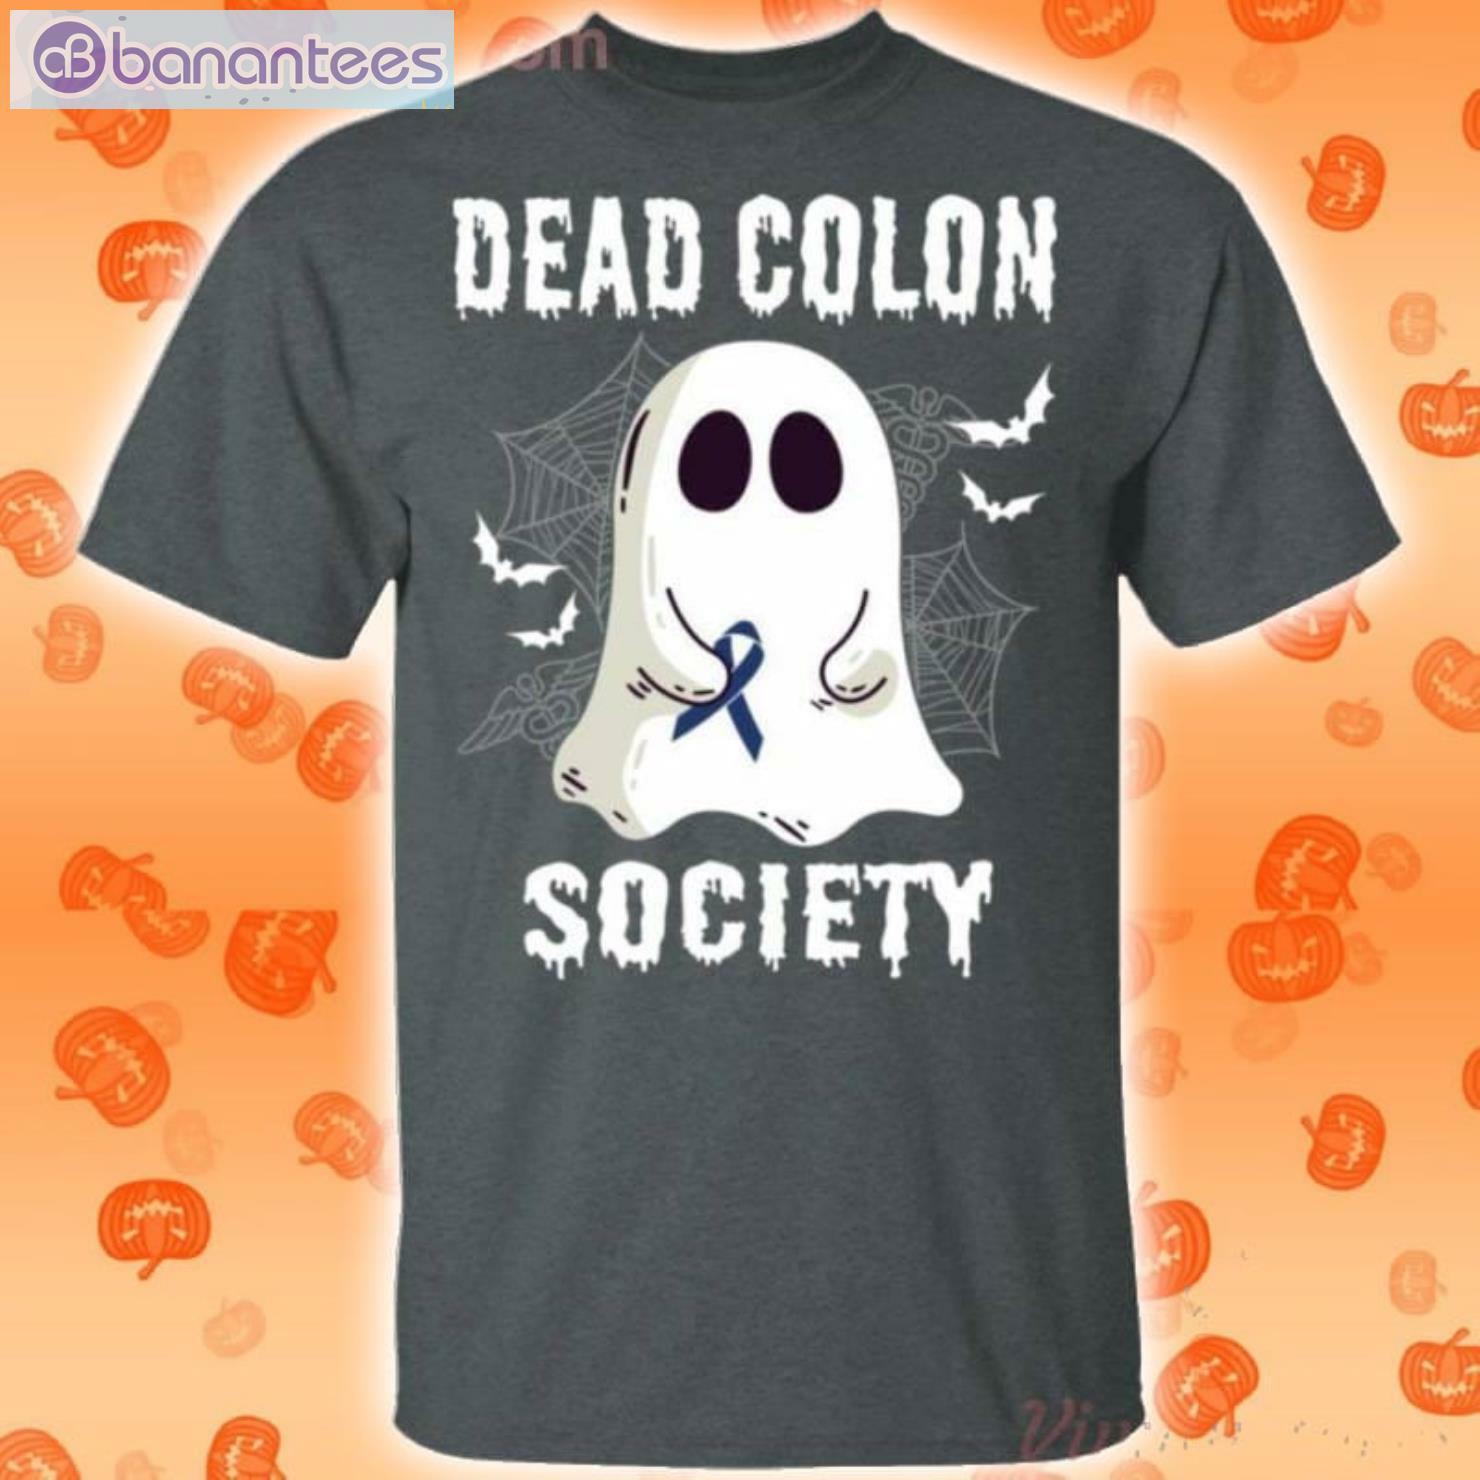 Dead Colon Society Boo Ghost Halloween Funny T-Shirt Product Photo 2 Product photo 2